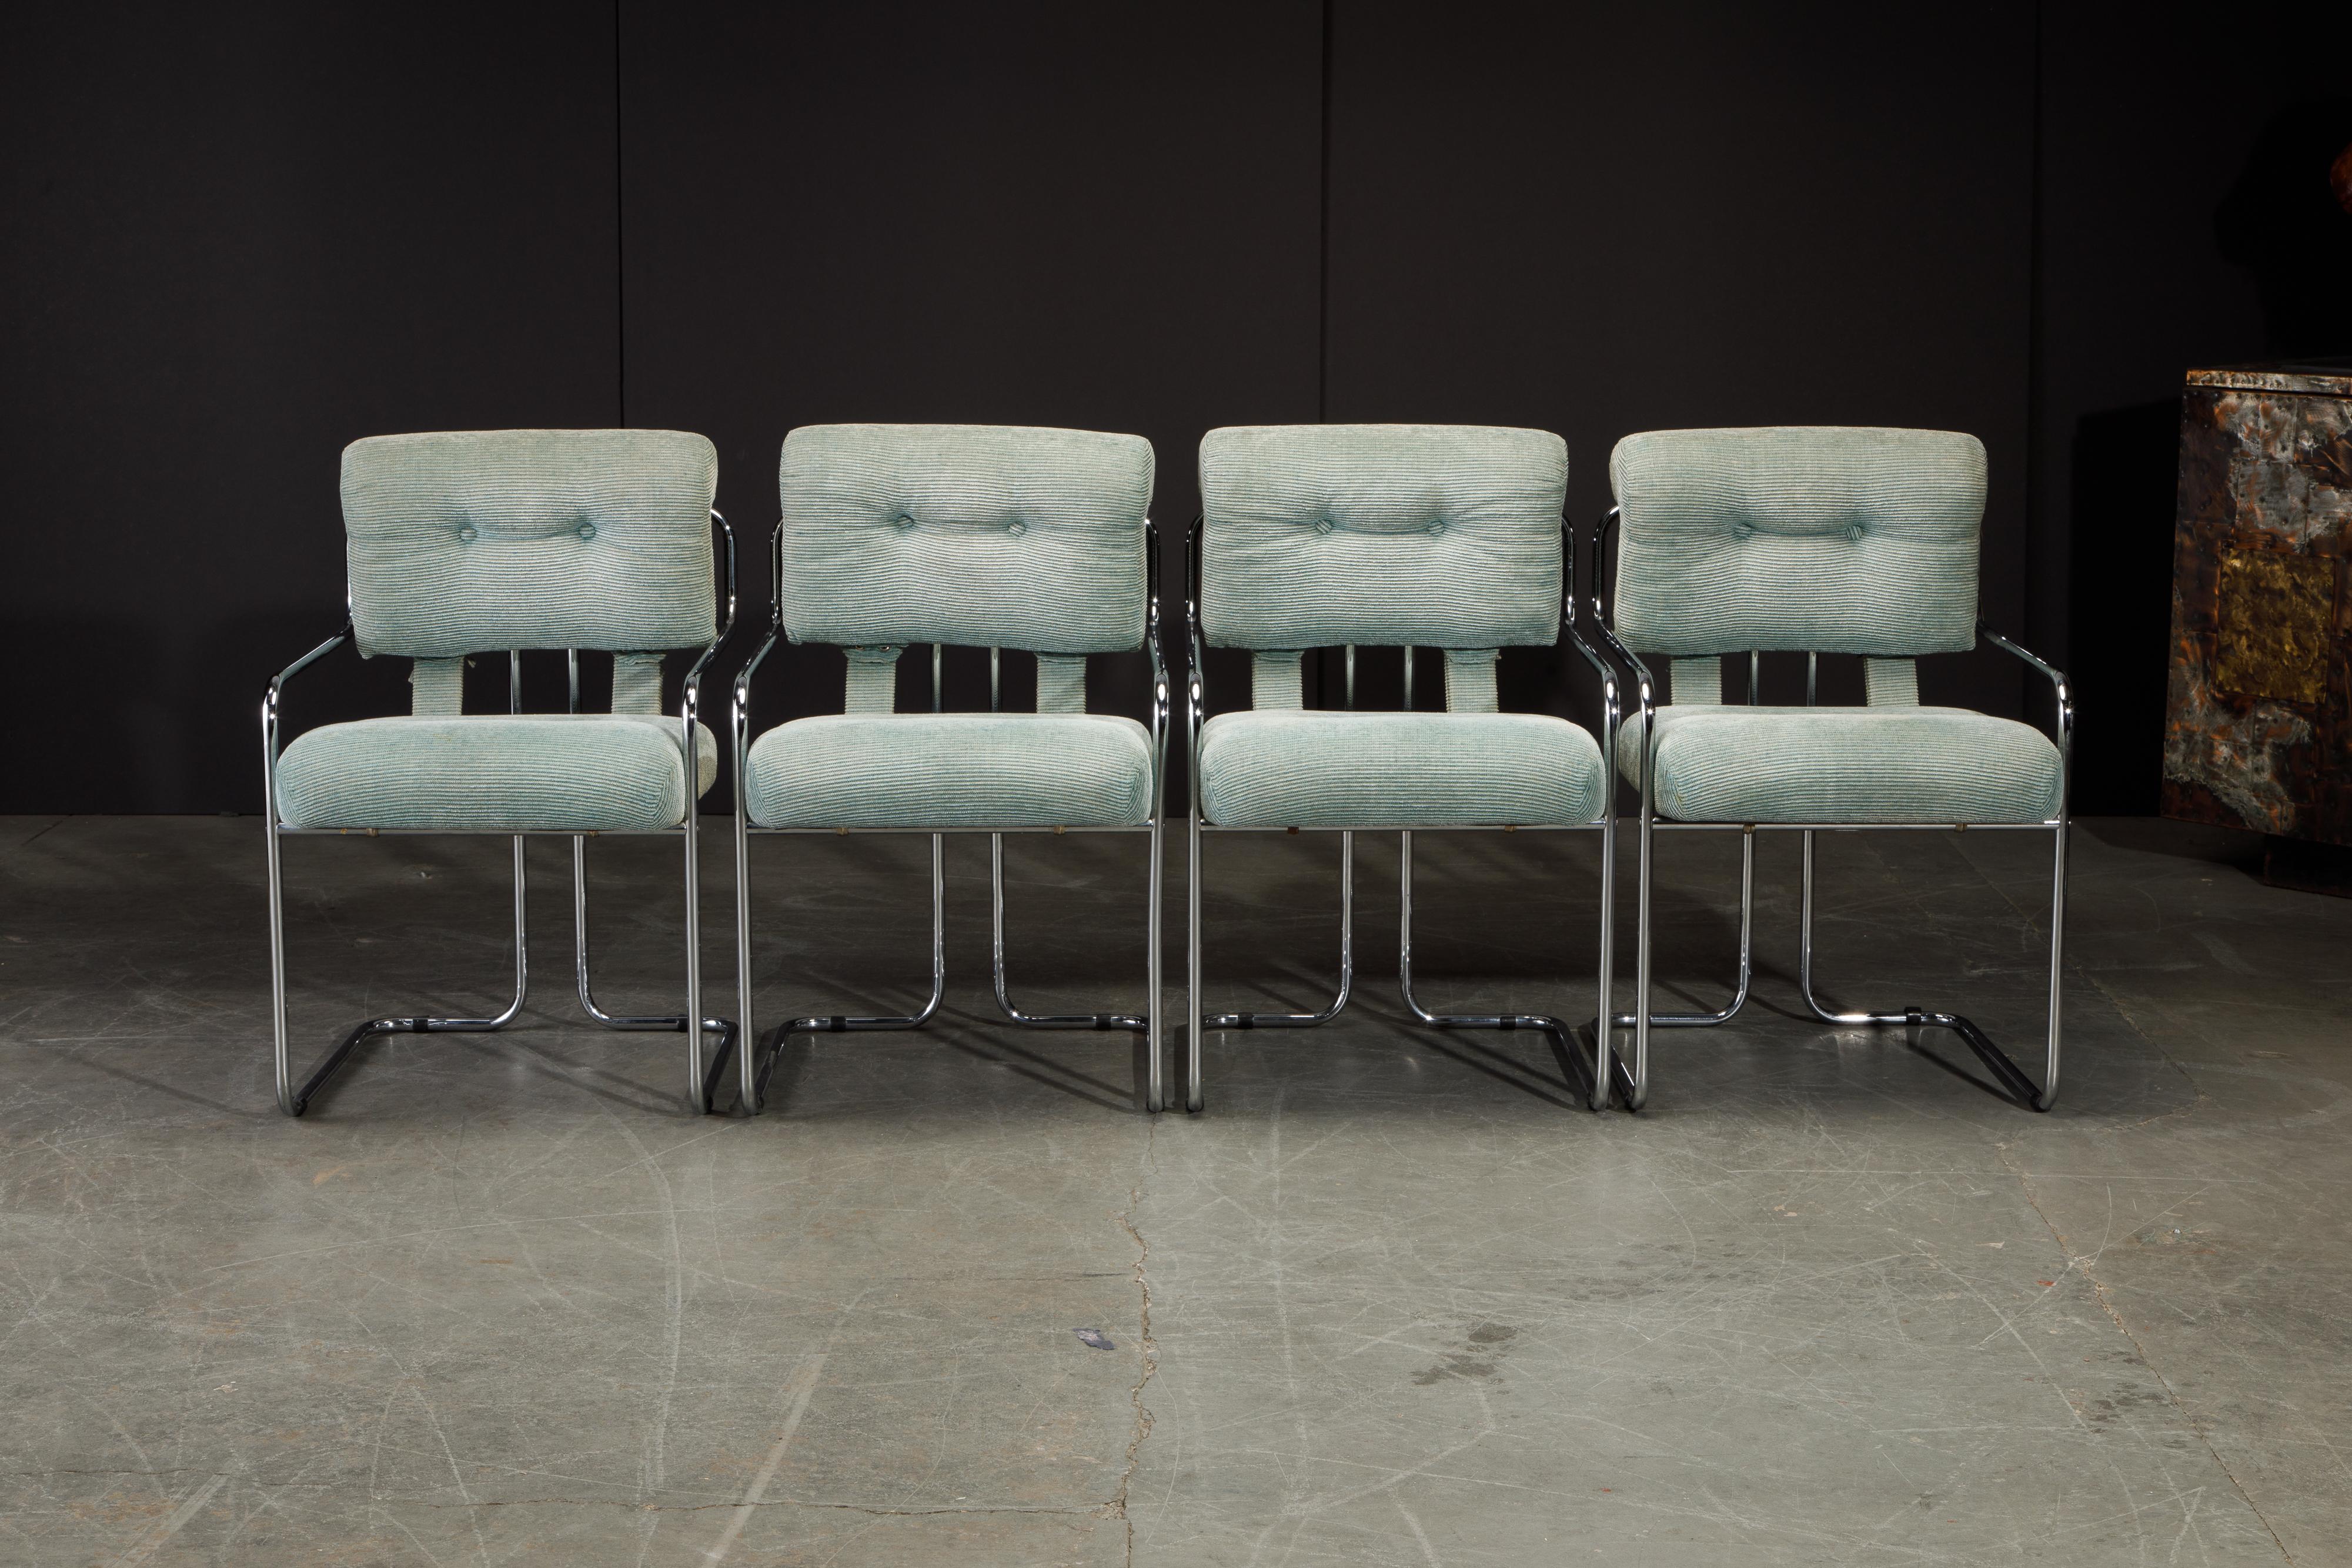 A beautiful set of four 'Tucroma' armchairs by Guido Faleschini for i4 Mariani in a Robbin's Egg (light blue-green) fabric with polished chrome frames. Priced in this listing as a set of four (4) chairs, contact us if you are looking for less than